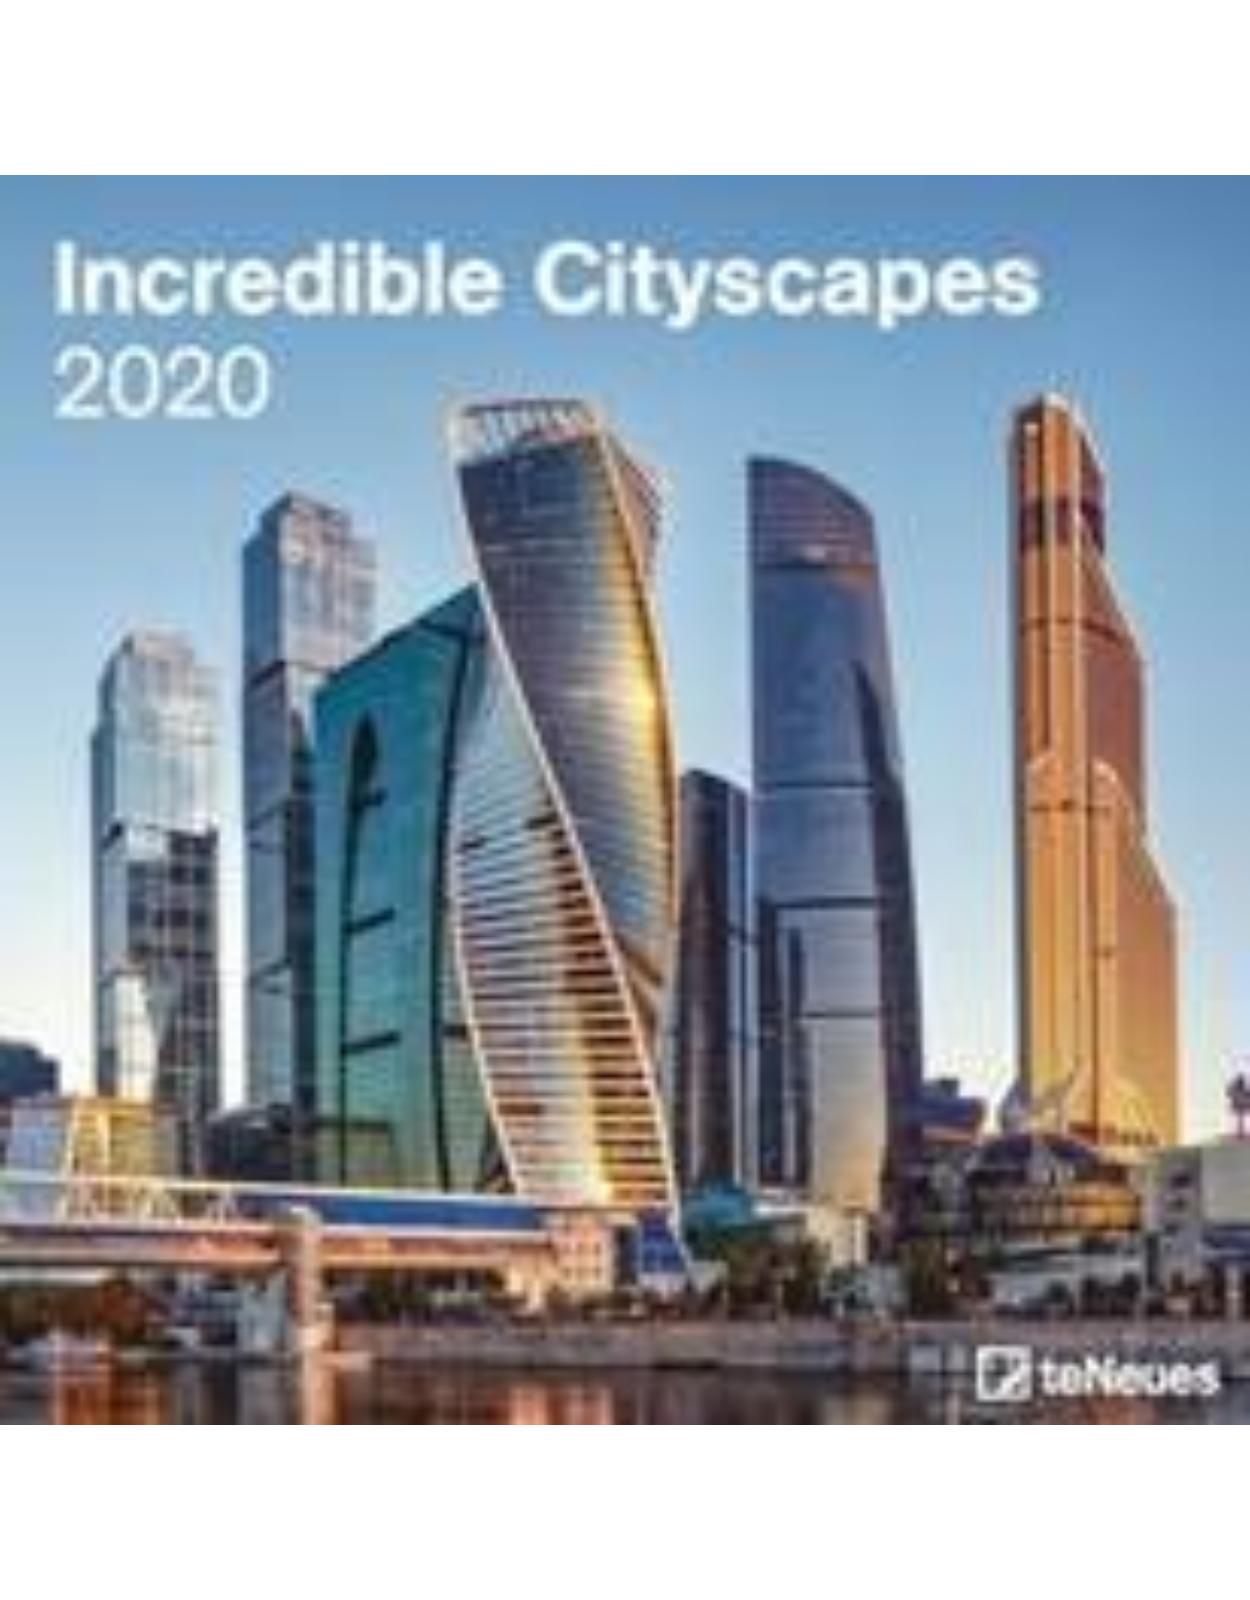 Incredible Cityscapes 2020